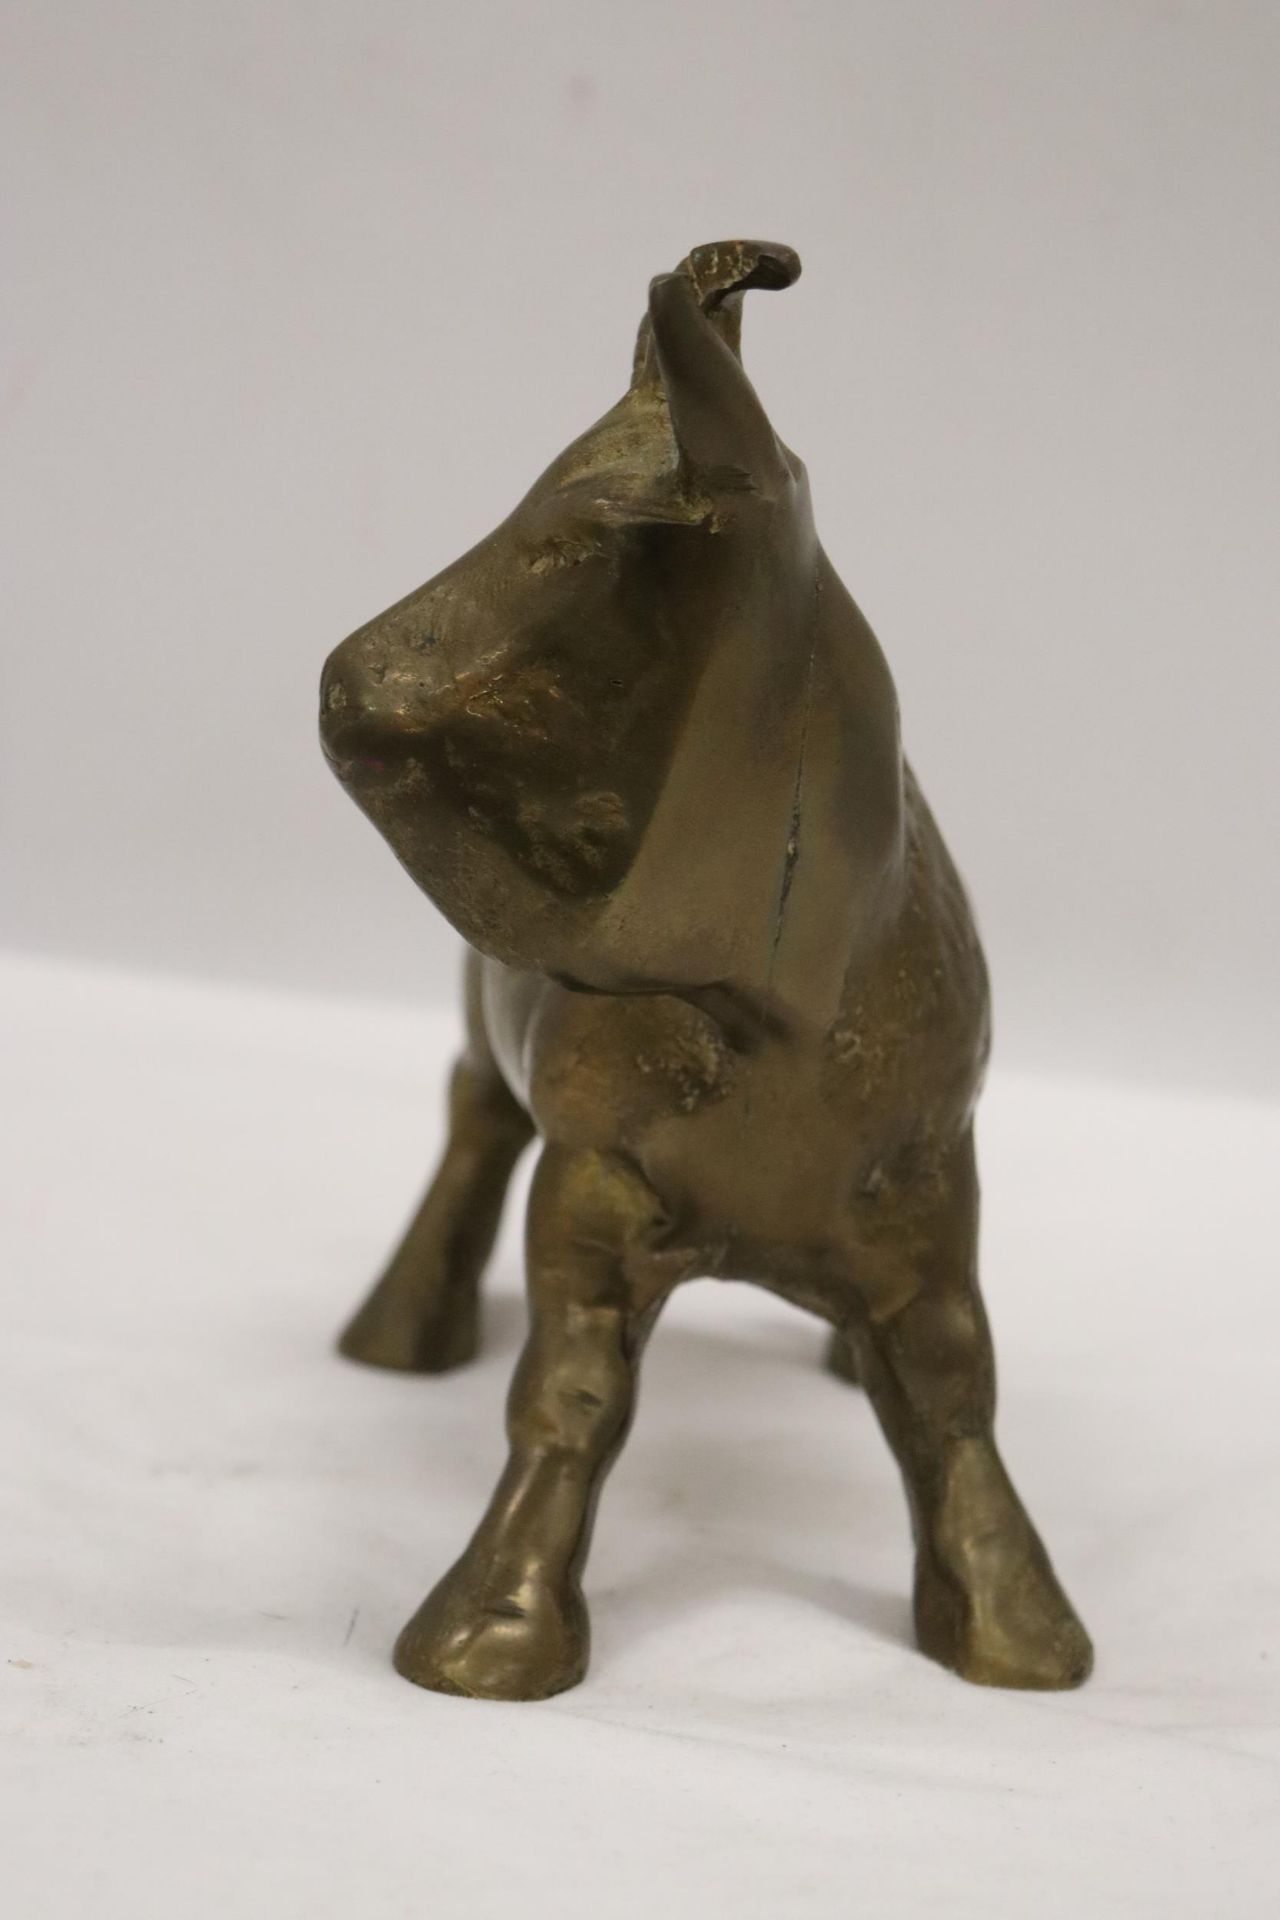 A VERY HEAVY SOLID BRASS GOAT, HEIGHT 16CM, LENGTH 18CM - Image 2 of 5